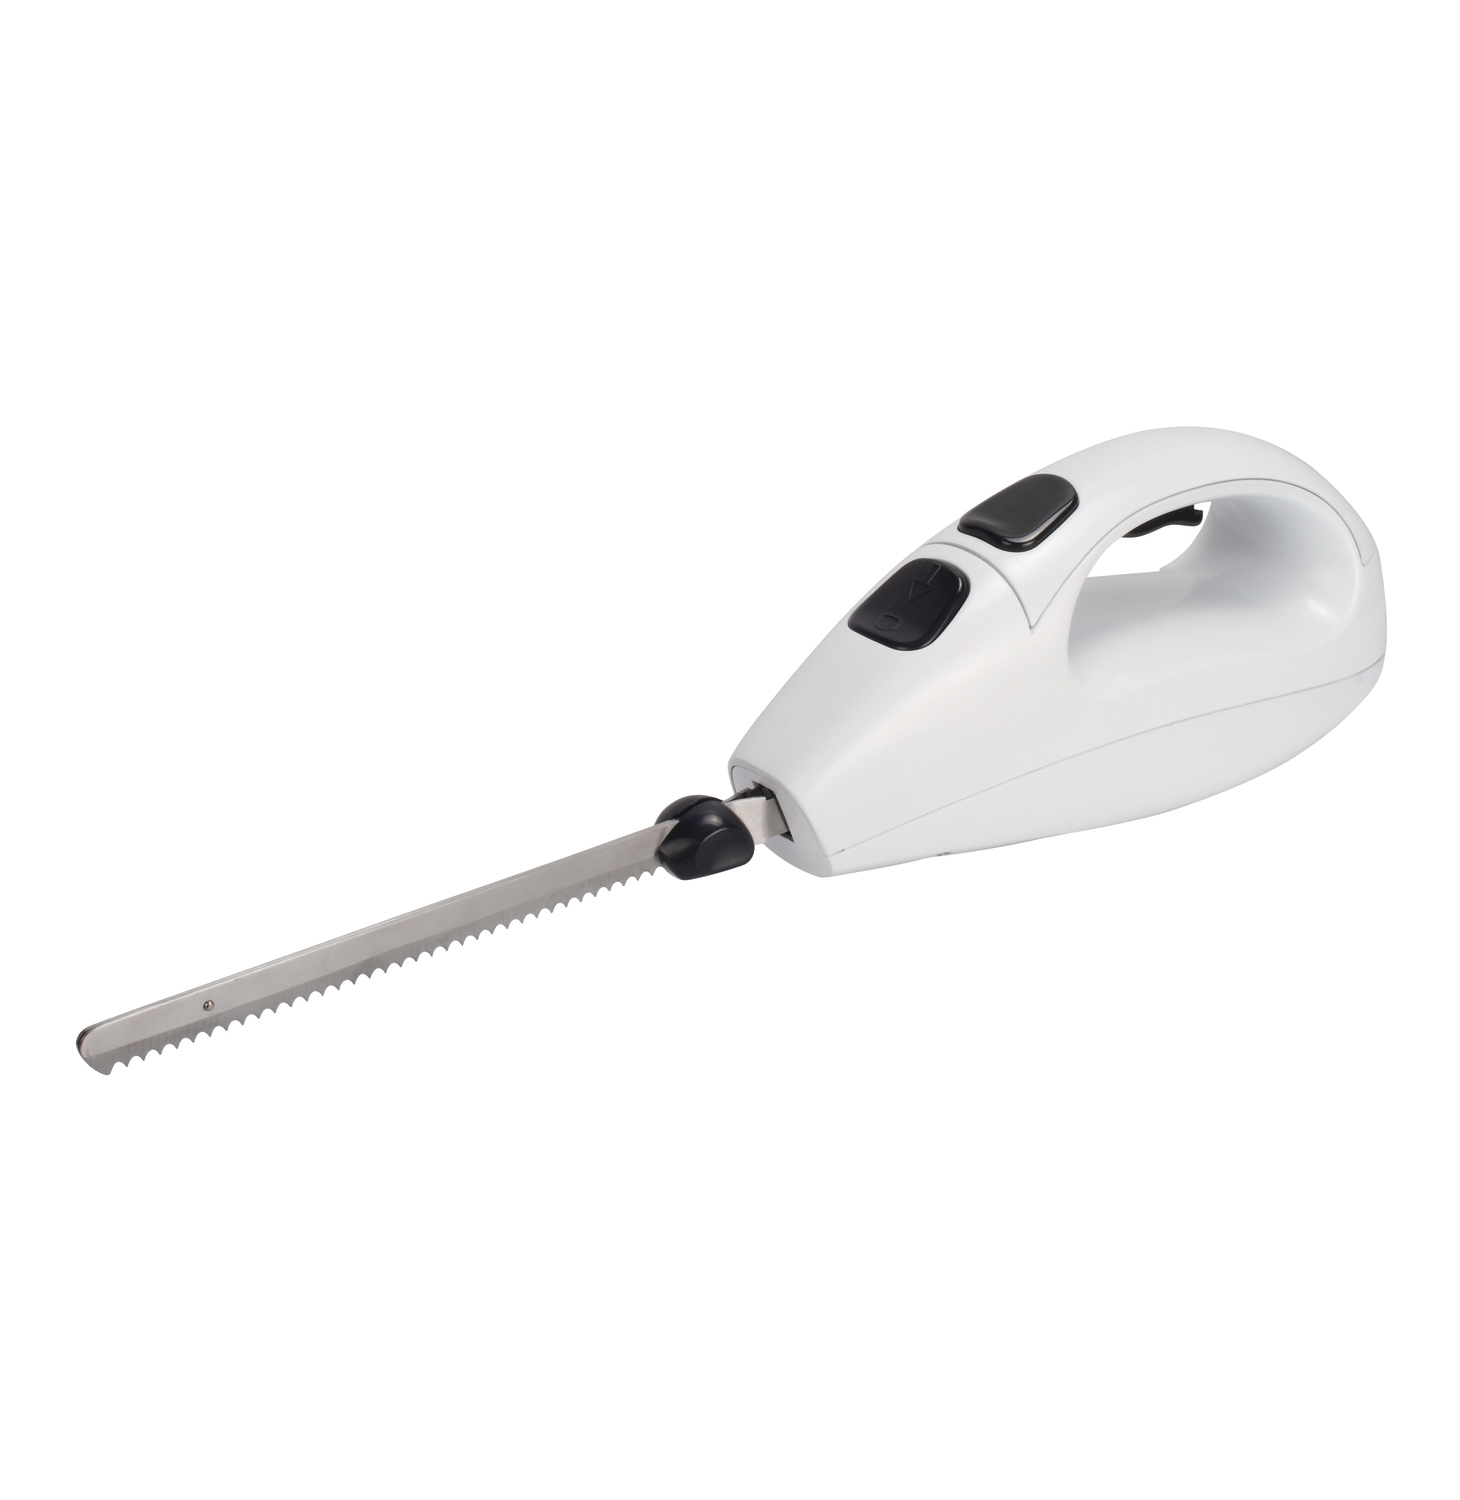 Sunbeam Electric Carving Knife